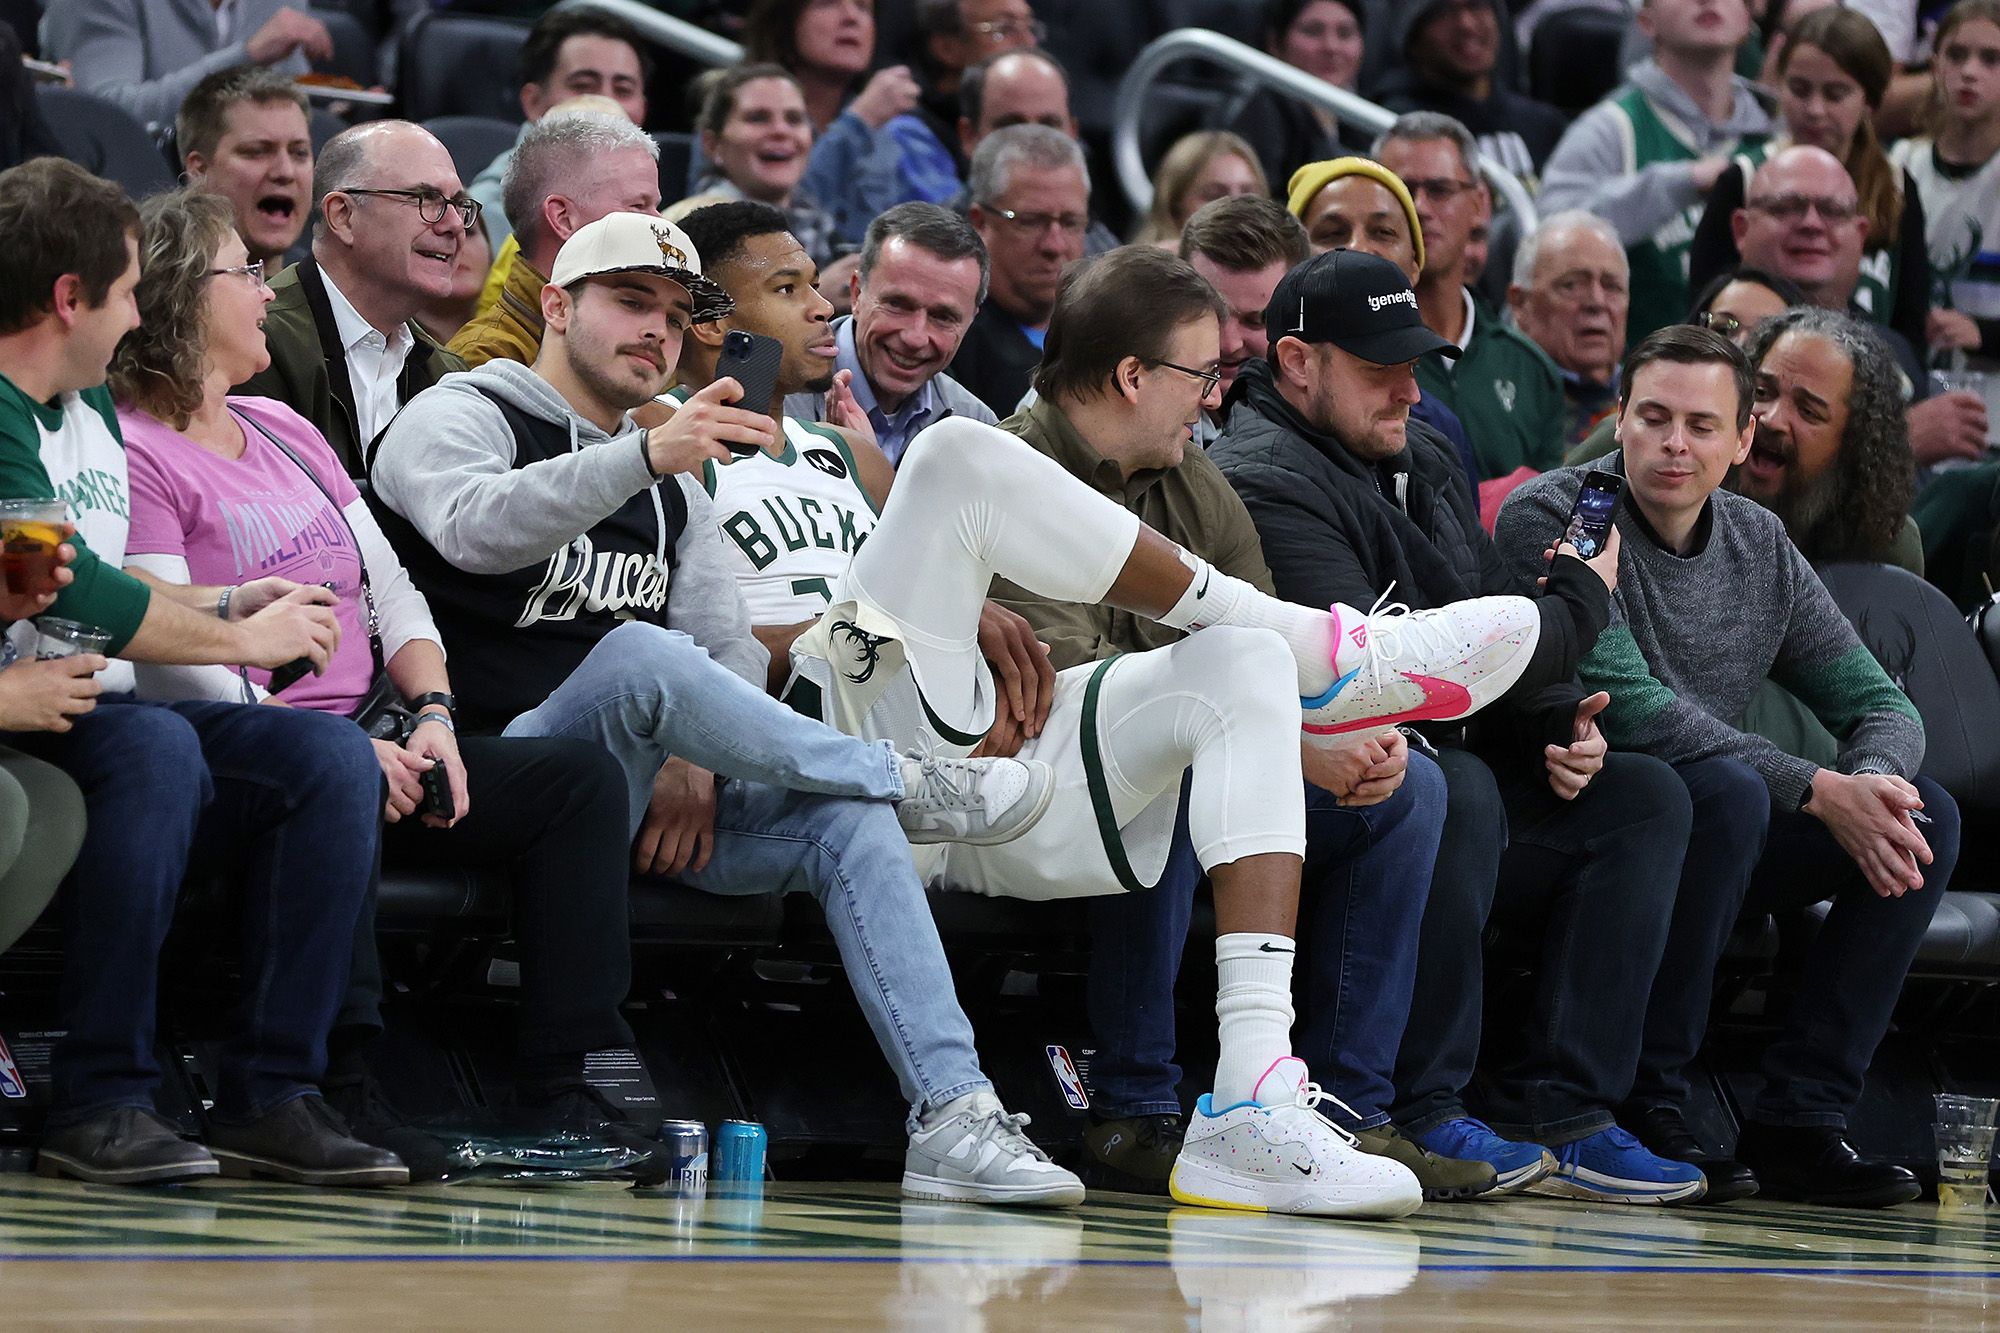 Bucks star Giannis Antetokounmpo ejected for 2nd technical foul against  Pistons - The San Diego Union-Tribune